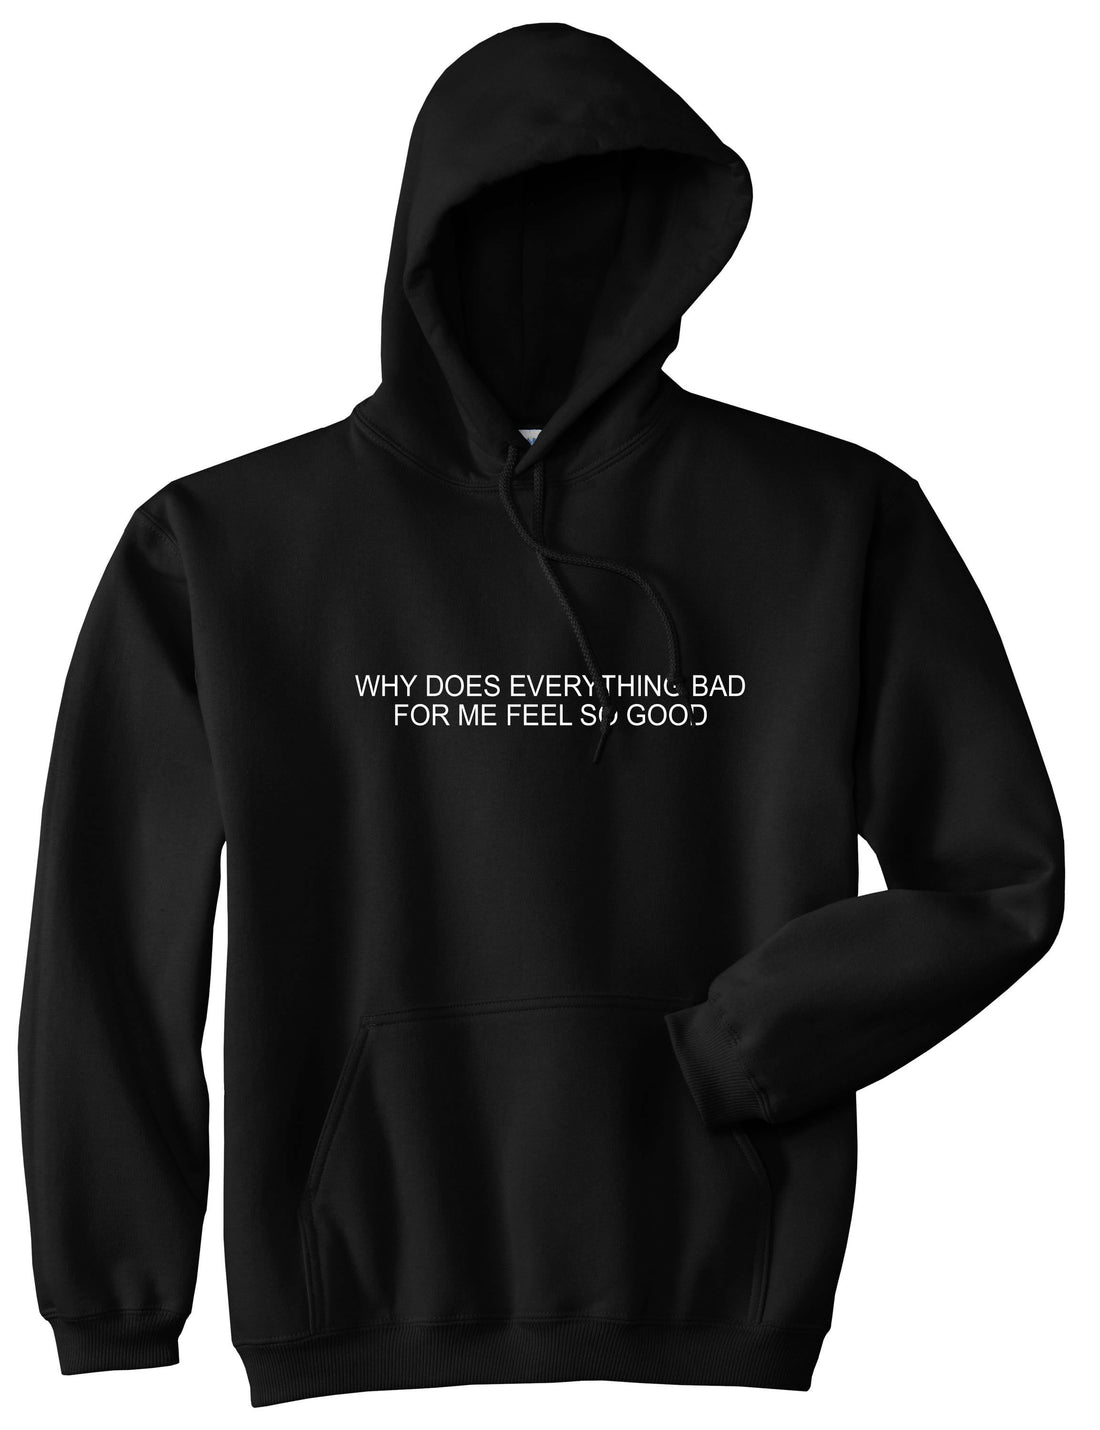 Why Does Everything Bad For Me Feel So Good Mens Pullover Hoodie Sweatshirt Black